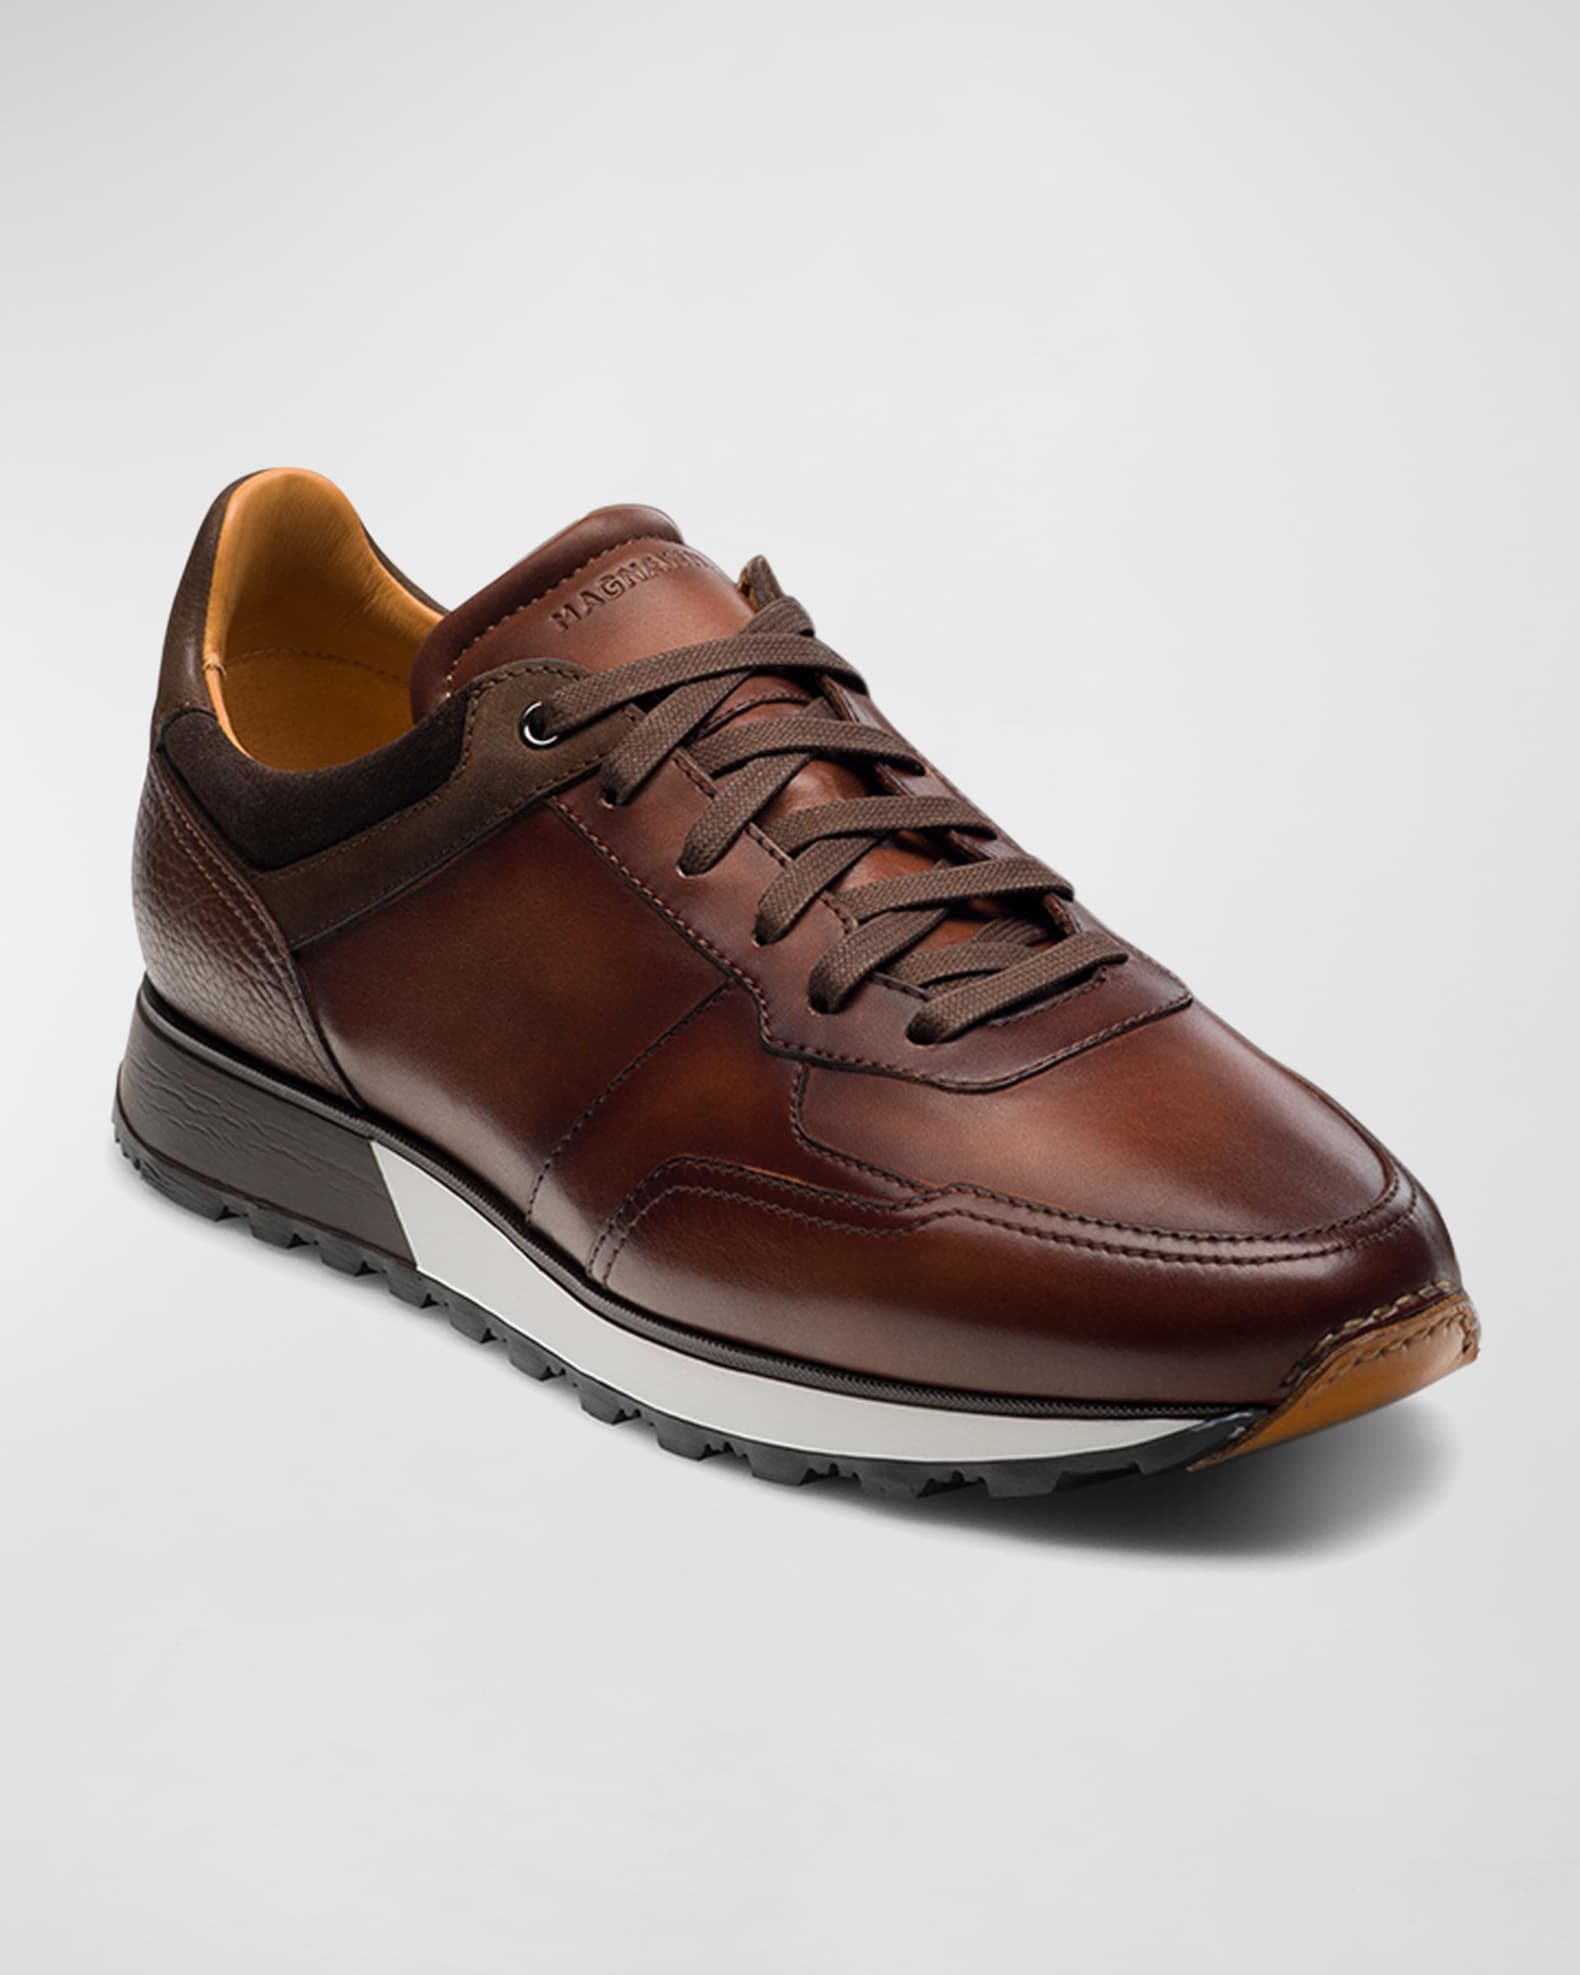 Magnanni Men's Arco Mix-Leather Trainer Sneakers | Neiman Marcus